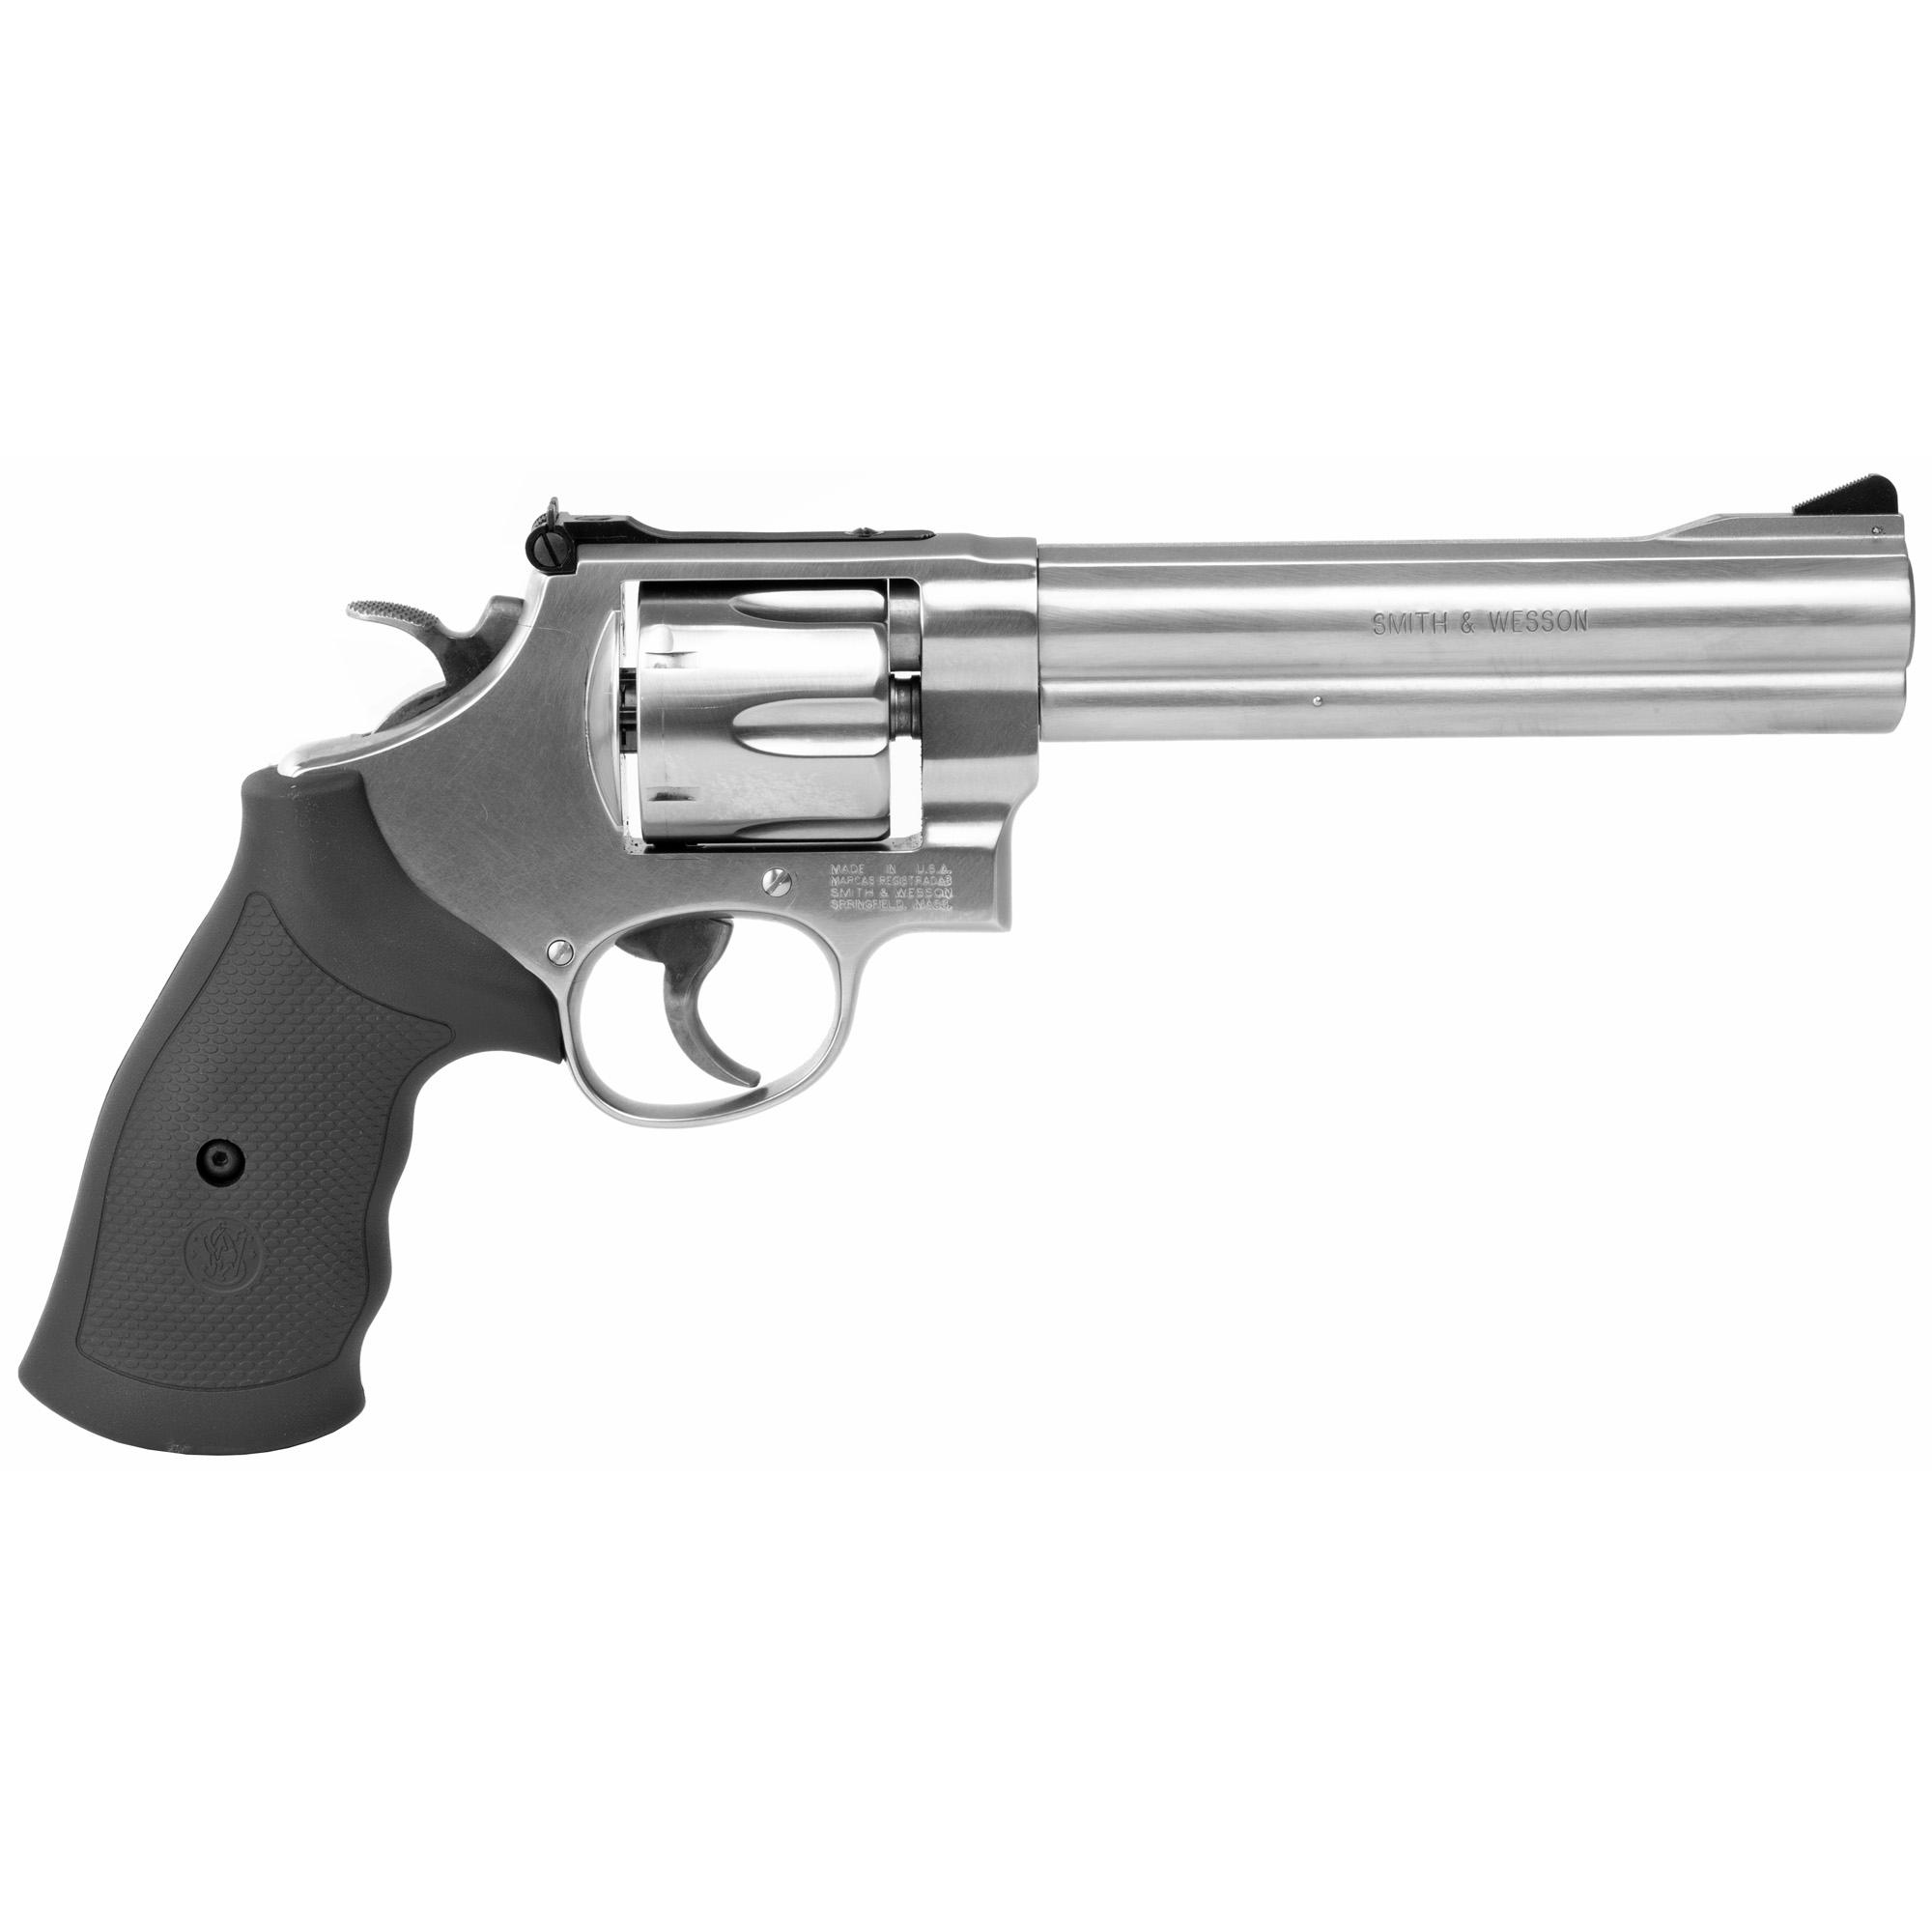  Smith & Wesson 610 10mm 6.5in 6rd